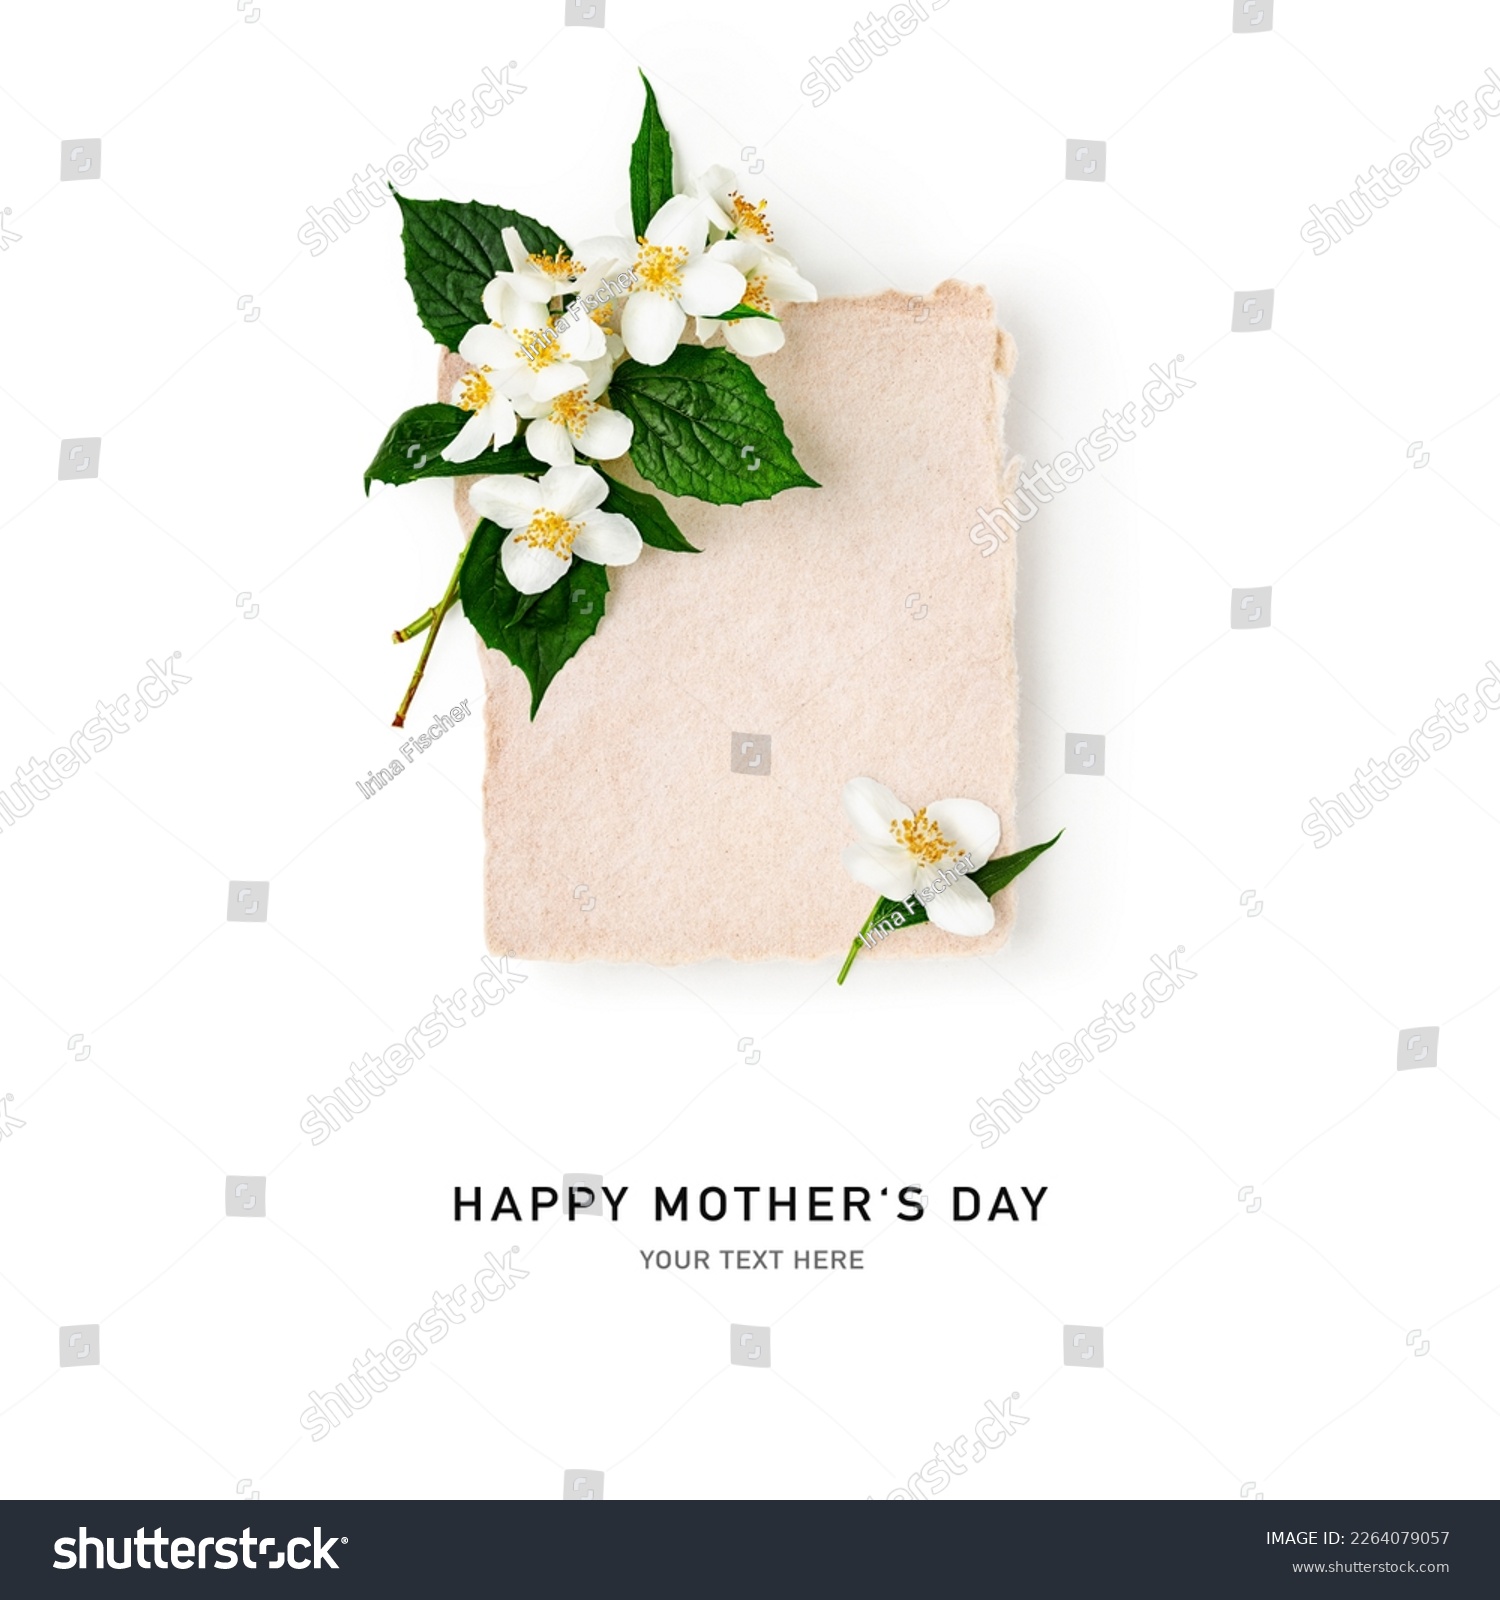 Spring jasmine flowers with paper card. Flowers, leaves and blank note isolated on white background. Happy mothers day. Design element. Creative layout. Copy space. Top view, flat lay
 #2264079057